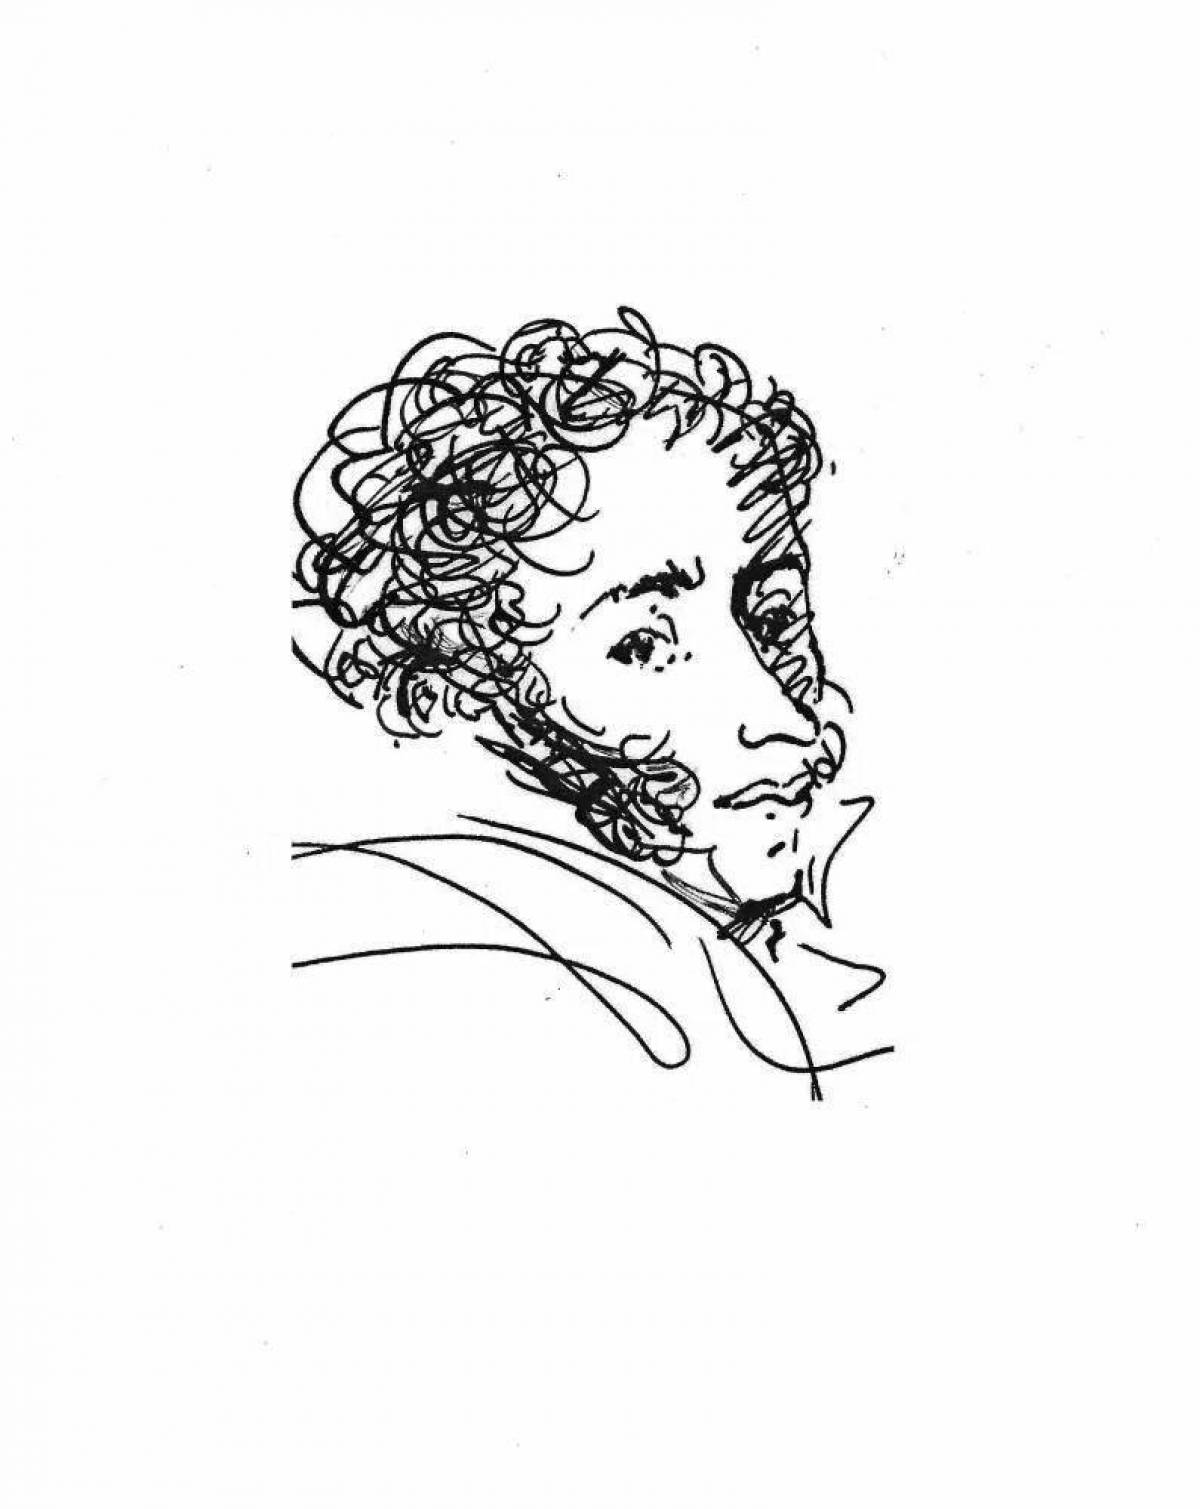 Coloring page luxury alexandr sergeevich pushkin